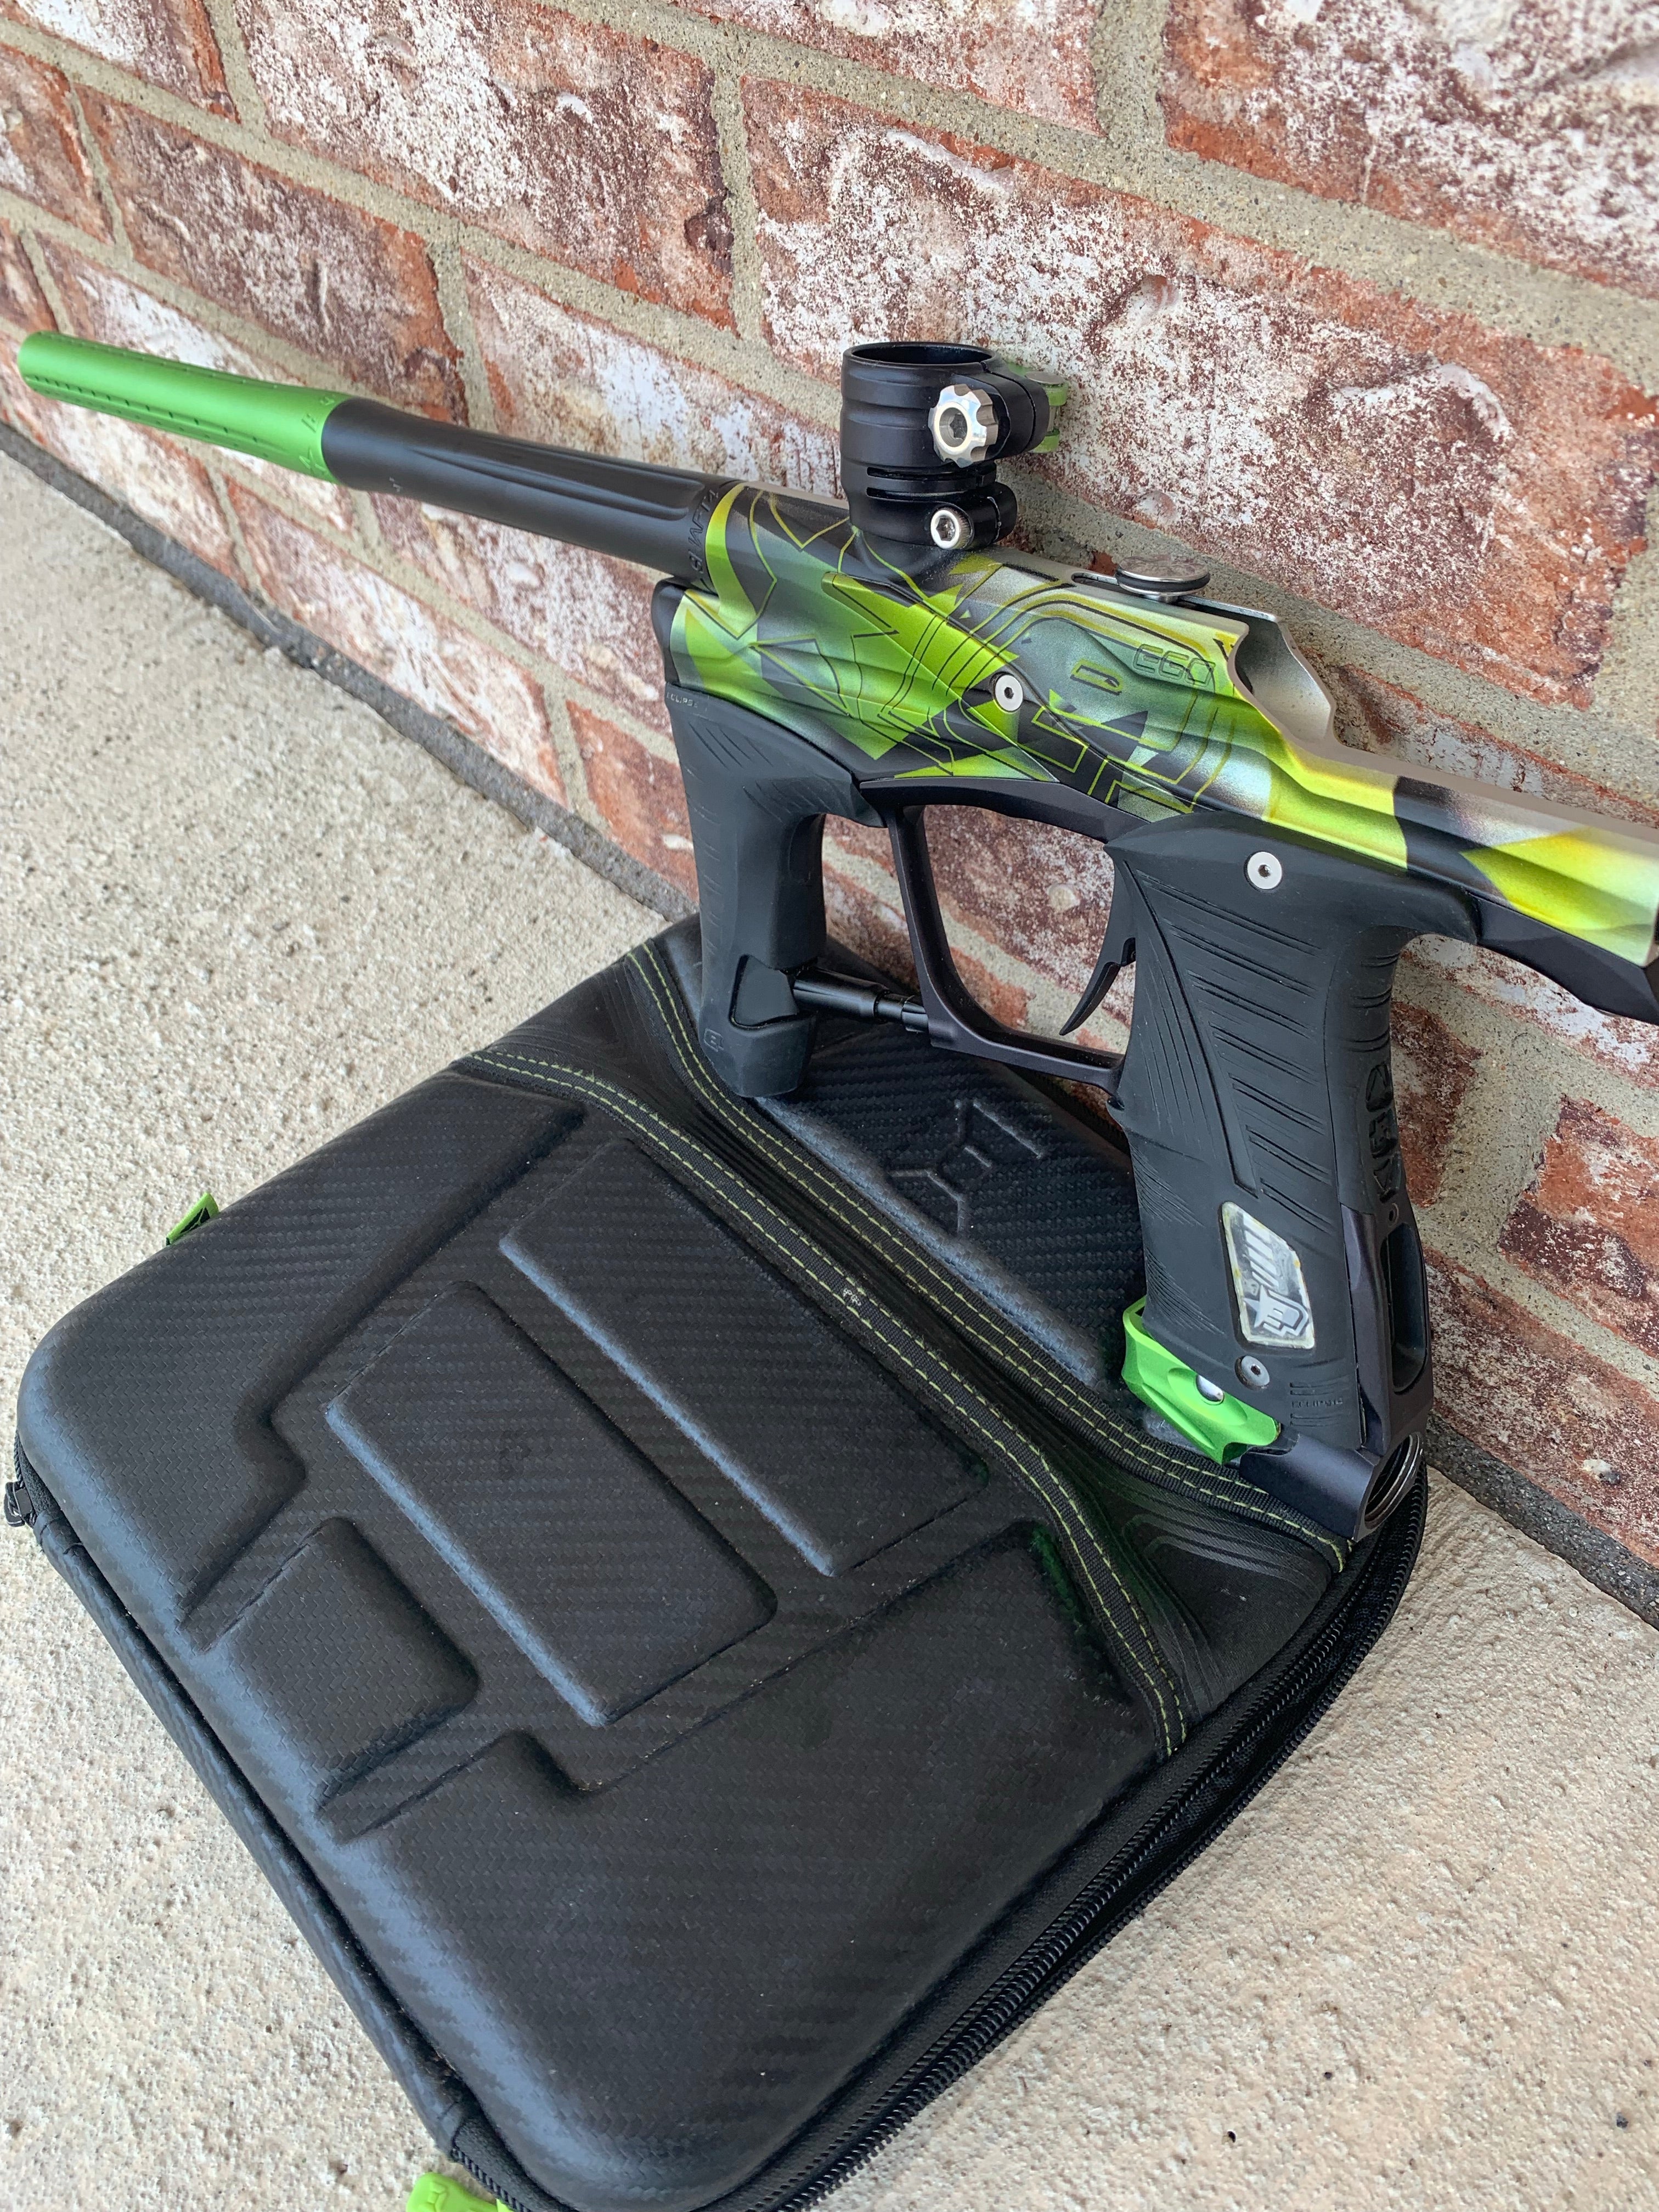 Used Planet Eclipse Lv1 Paintball Marker- Limited Edition